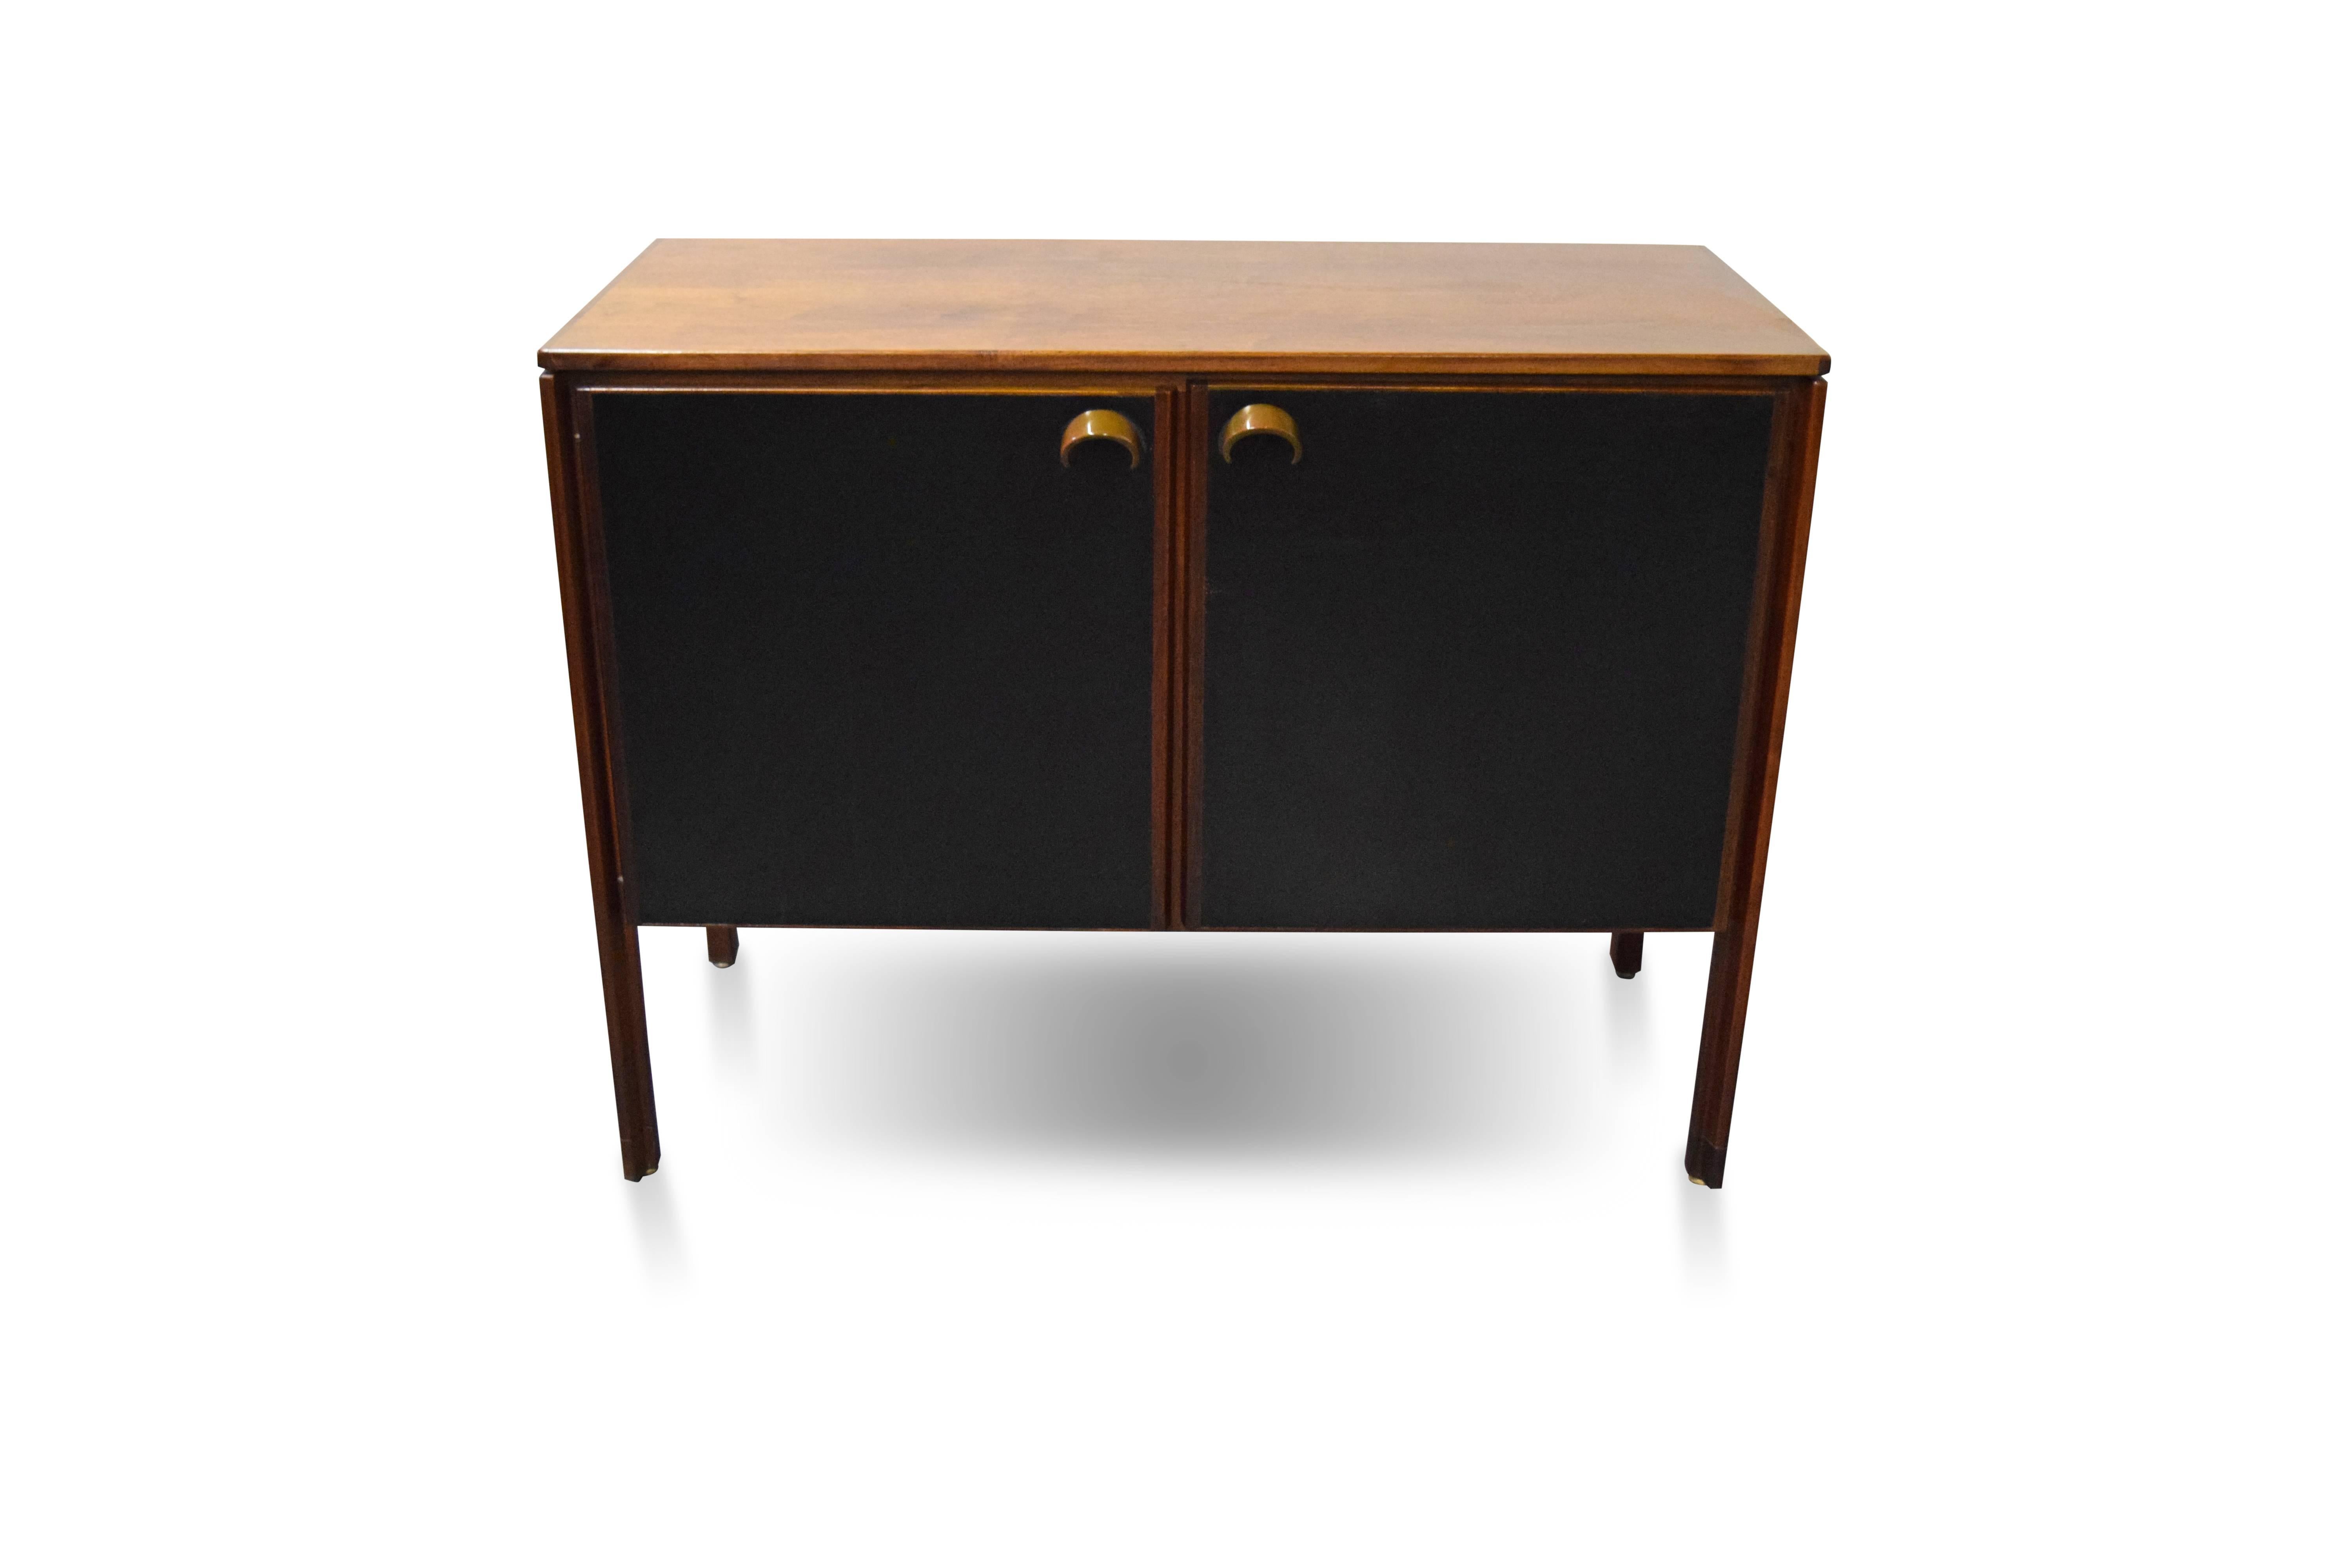 Jens Risom compact credenza 

Interior shelves are adjustable.